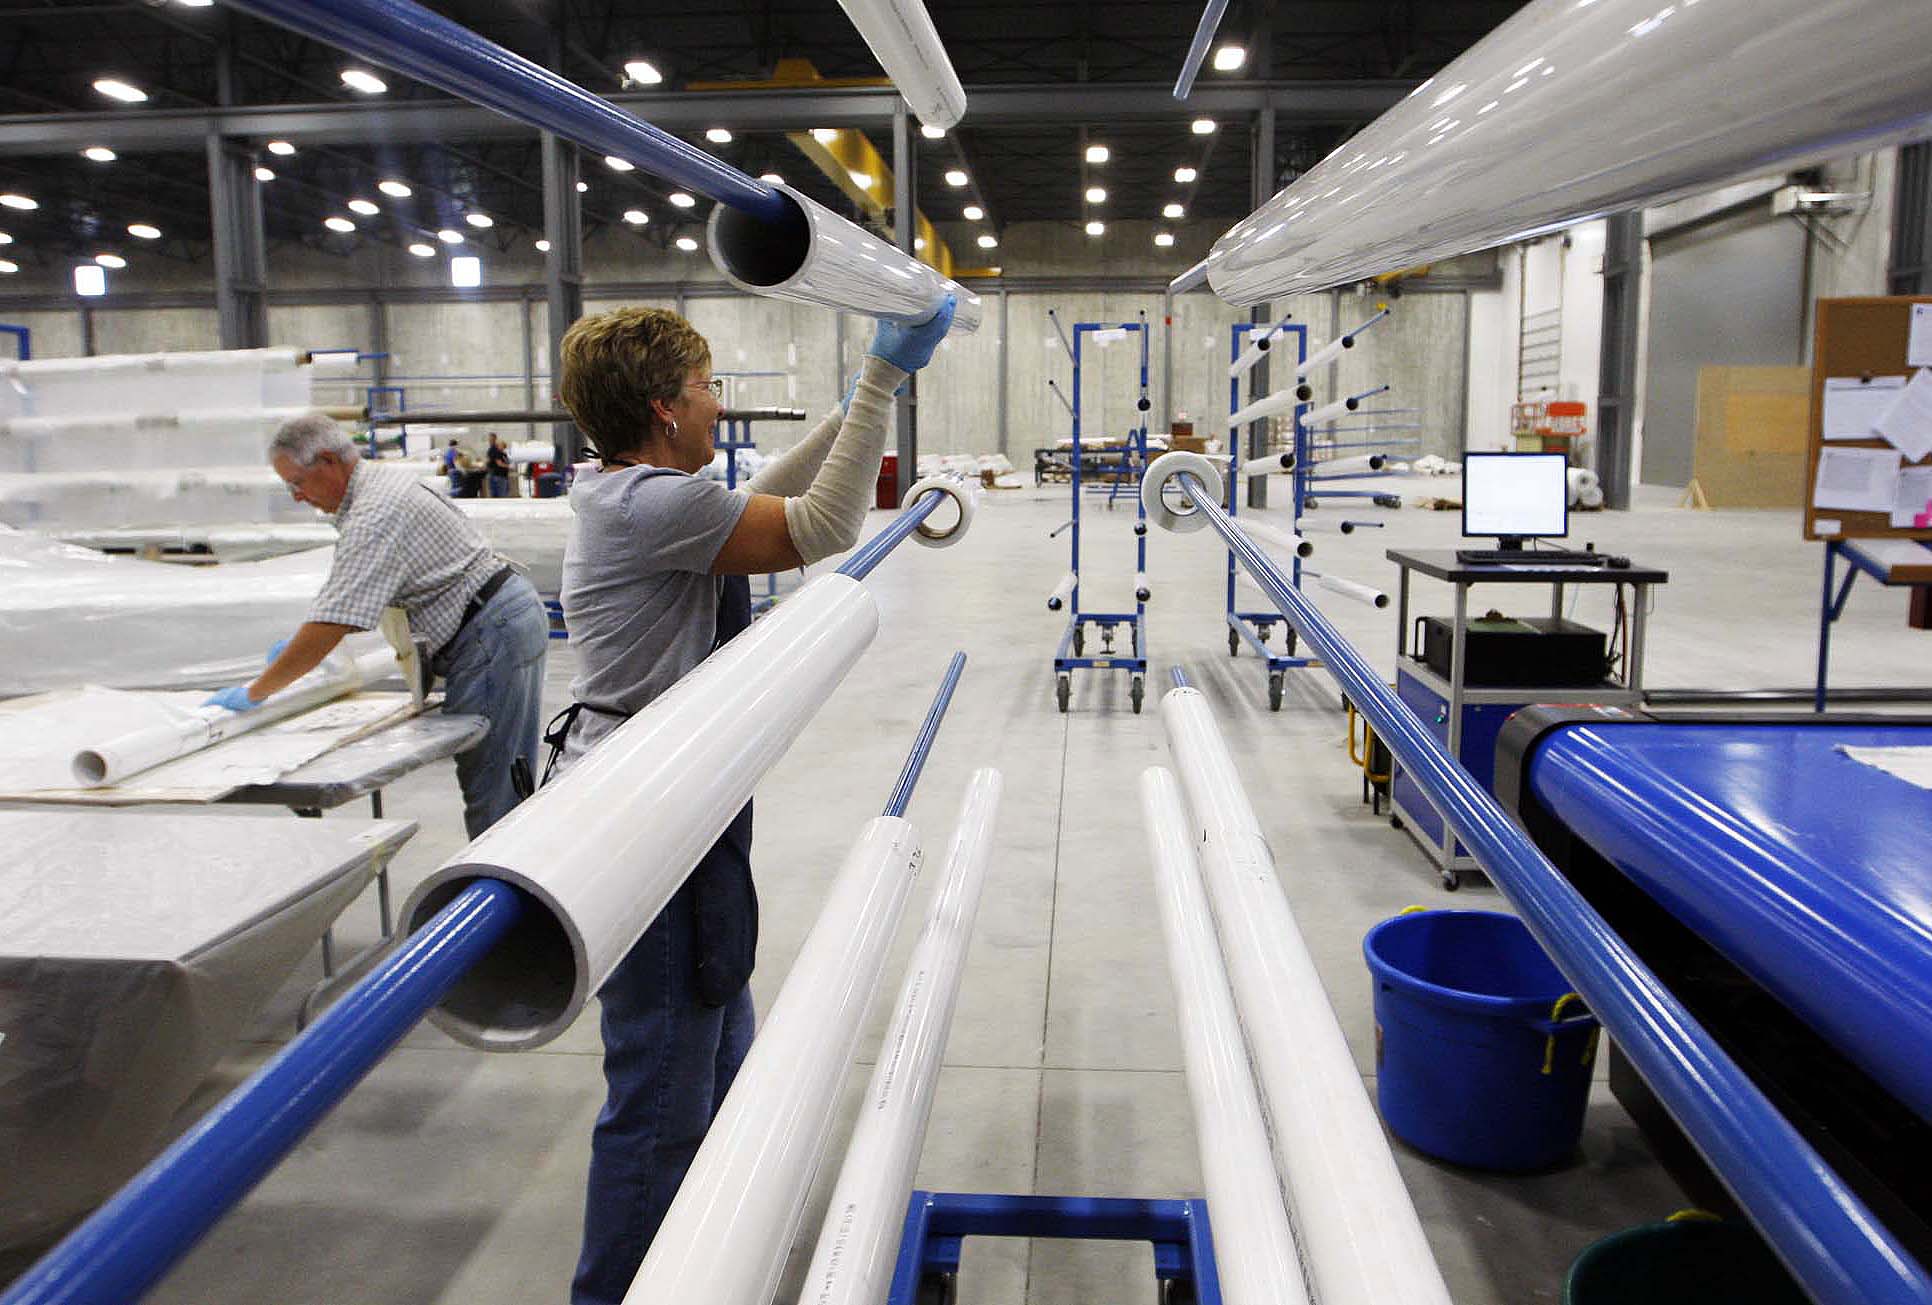 Pipe used to roll fiberglass is placed on a holder inside the TPI Composites wind turbine fabrication plant in Newton, Iowa. The wind energy industry replaced some of the jobs lost when Maytag left town.